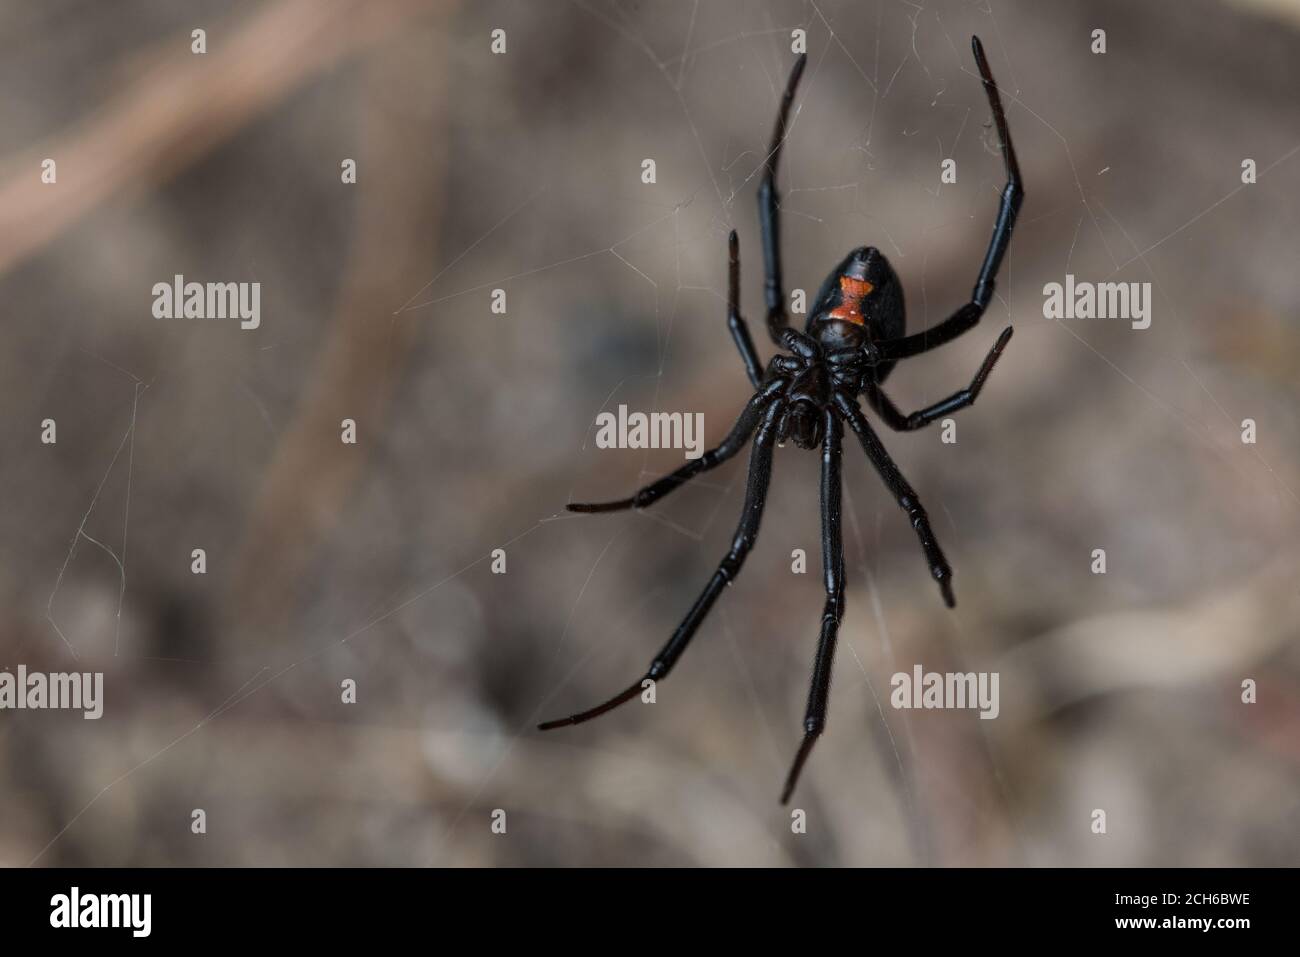 The Western black widow spider (Latrodectus hesperus) one of the few dangerously venomous spiders in North America. Seen in California. Stock Photo